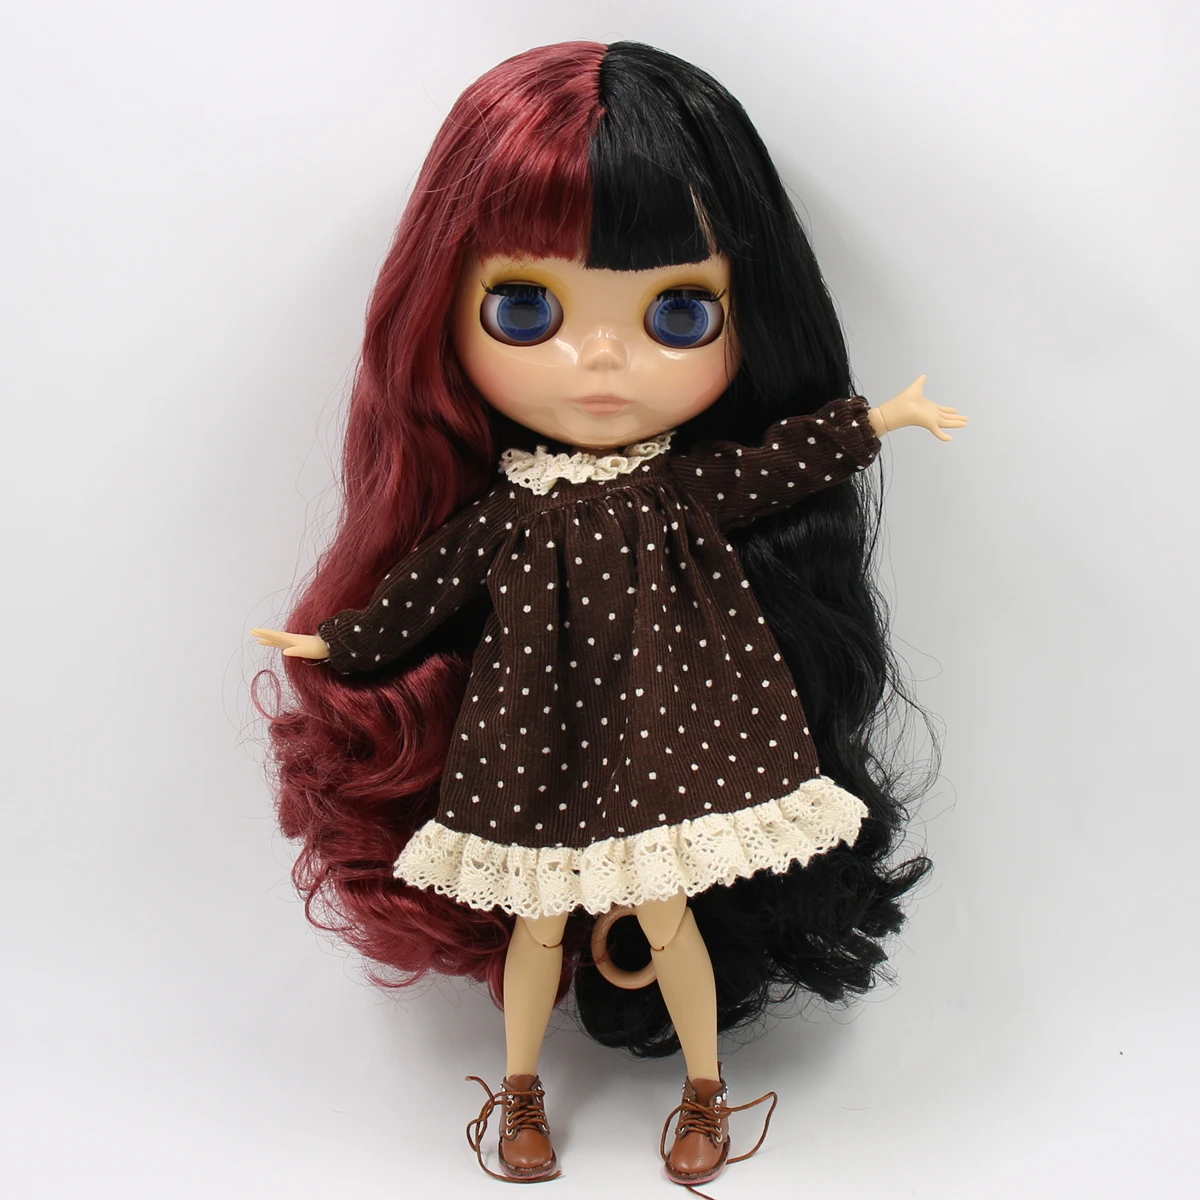 

ICY DBS blyth doll 1/6 BJD toy joint body special offer lower price DIY girls gift 30cm articulated doll random eyes colors